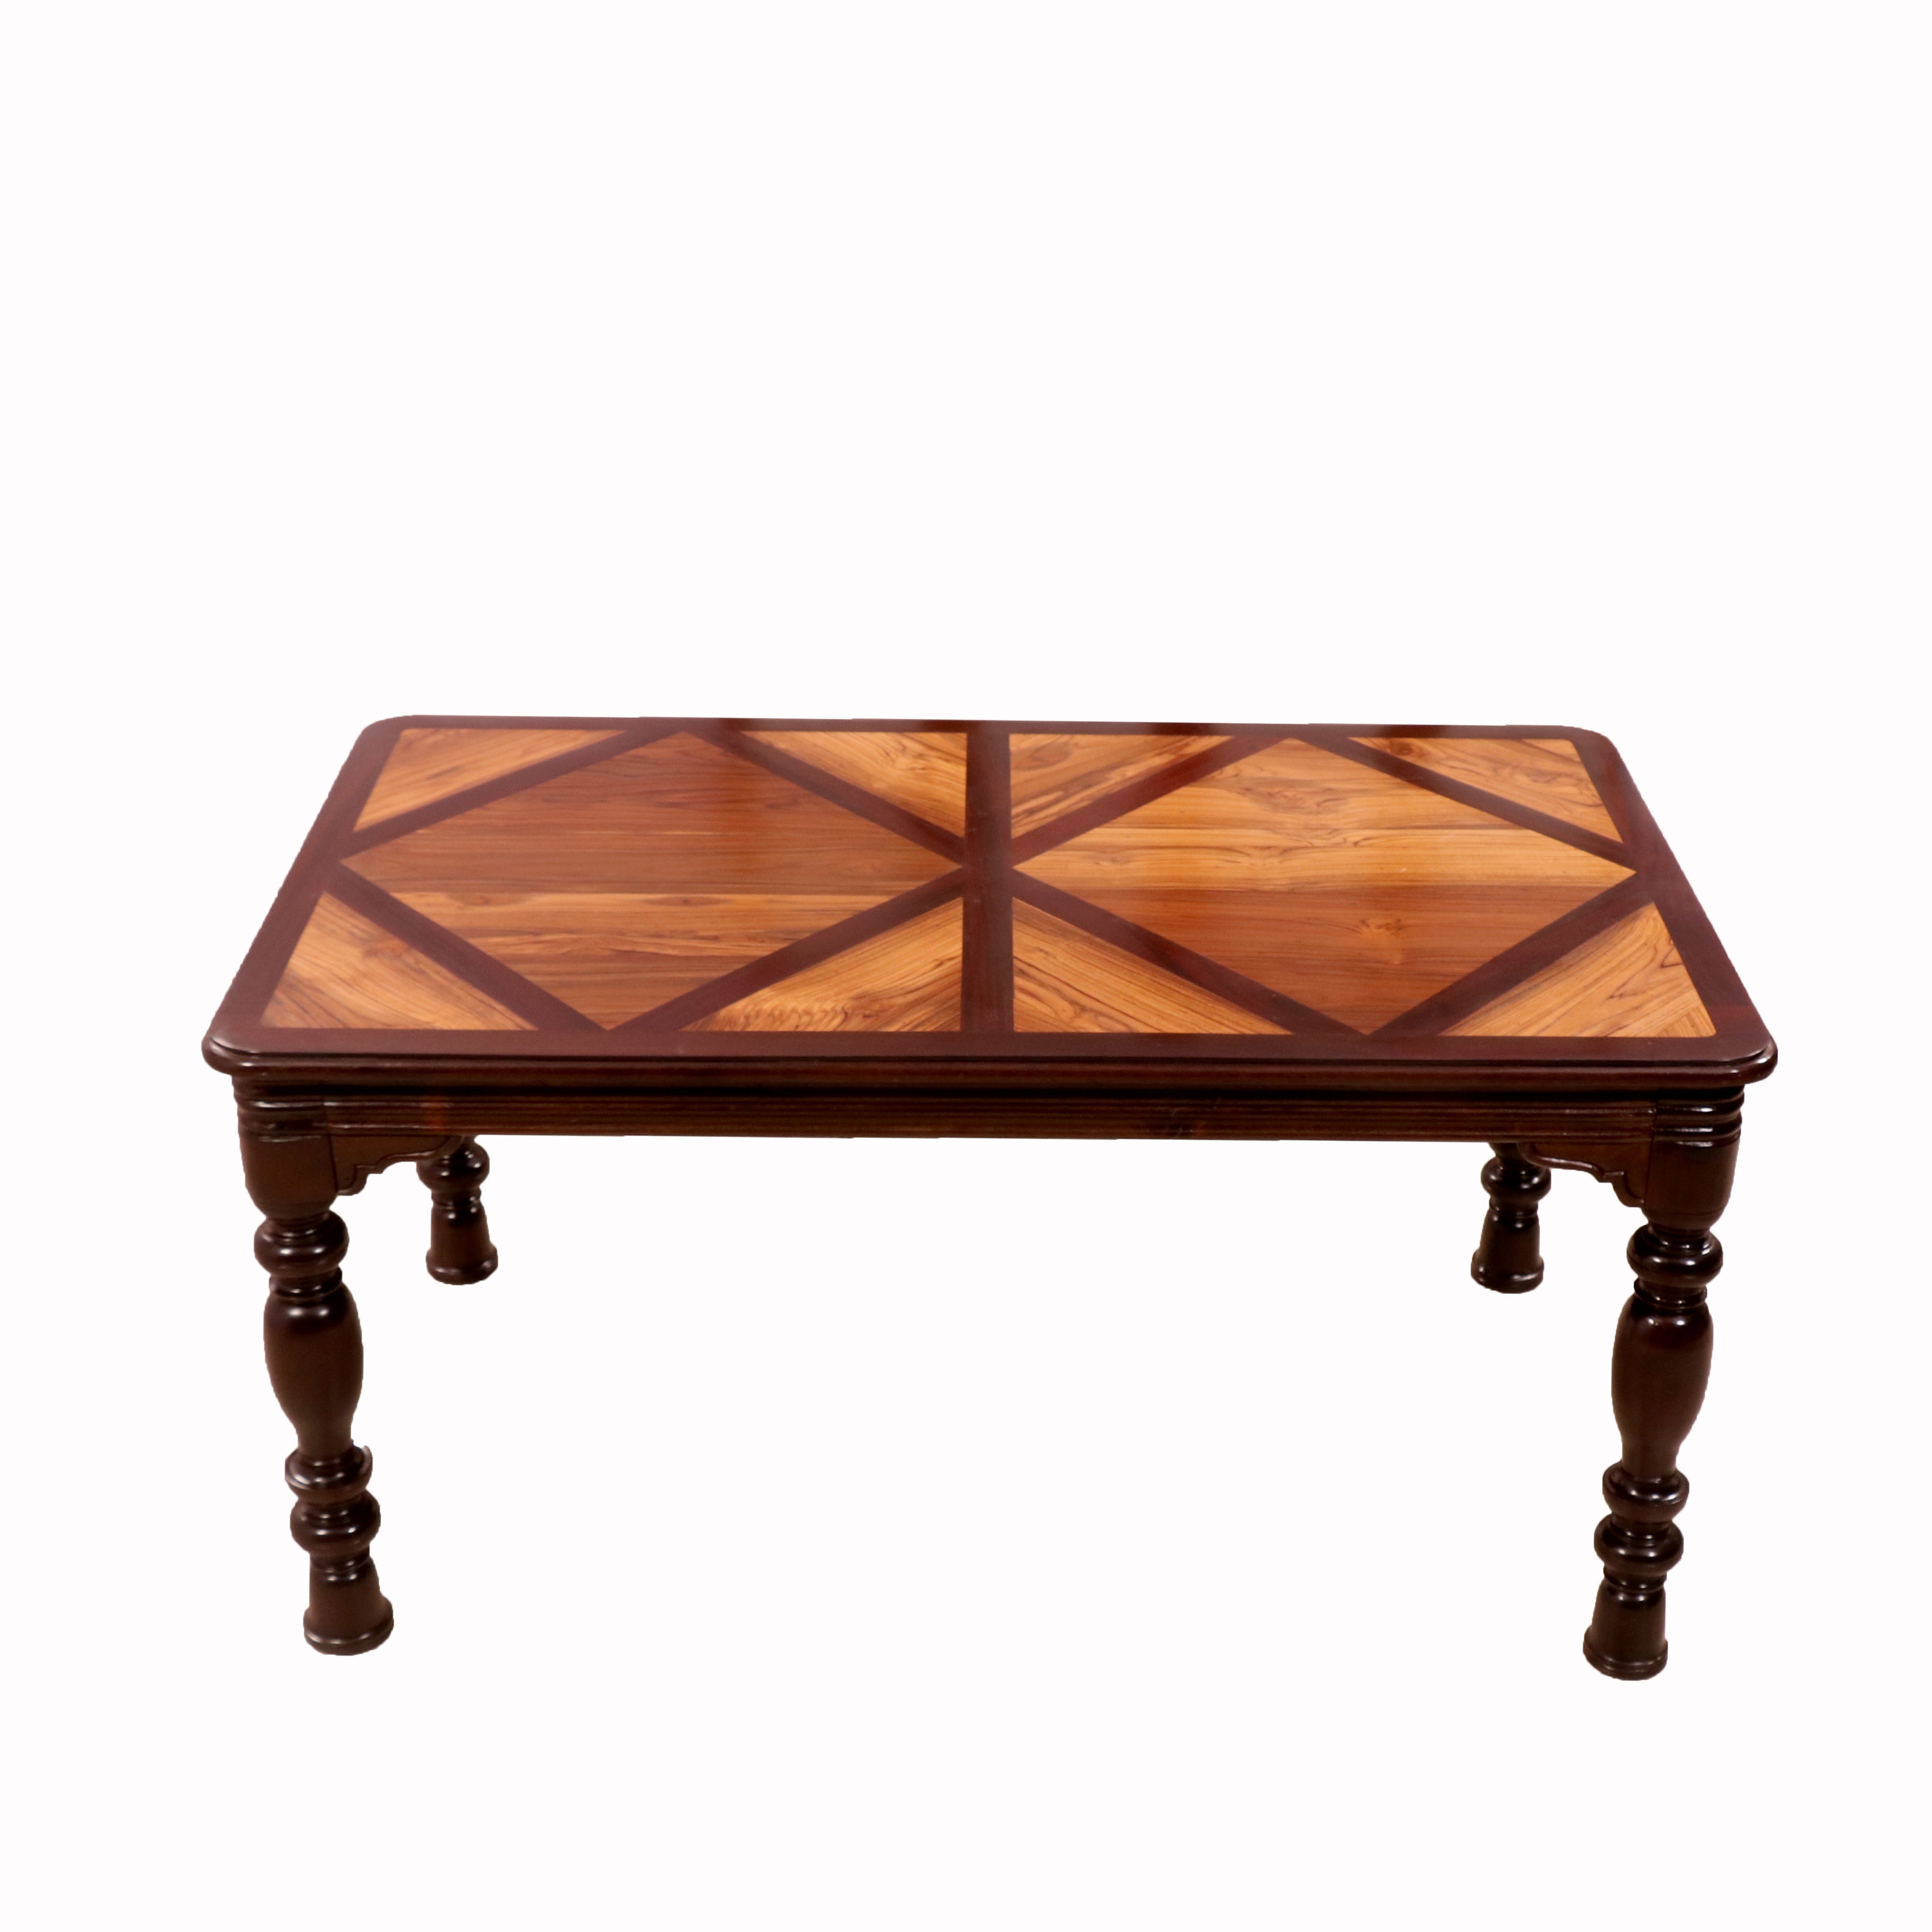 Double Diamond Indian Teak Wood Dining Table Dining Table